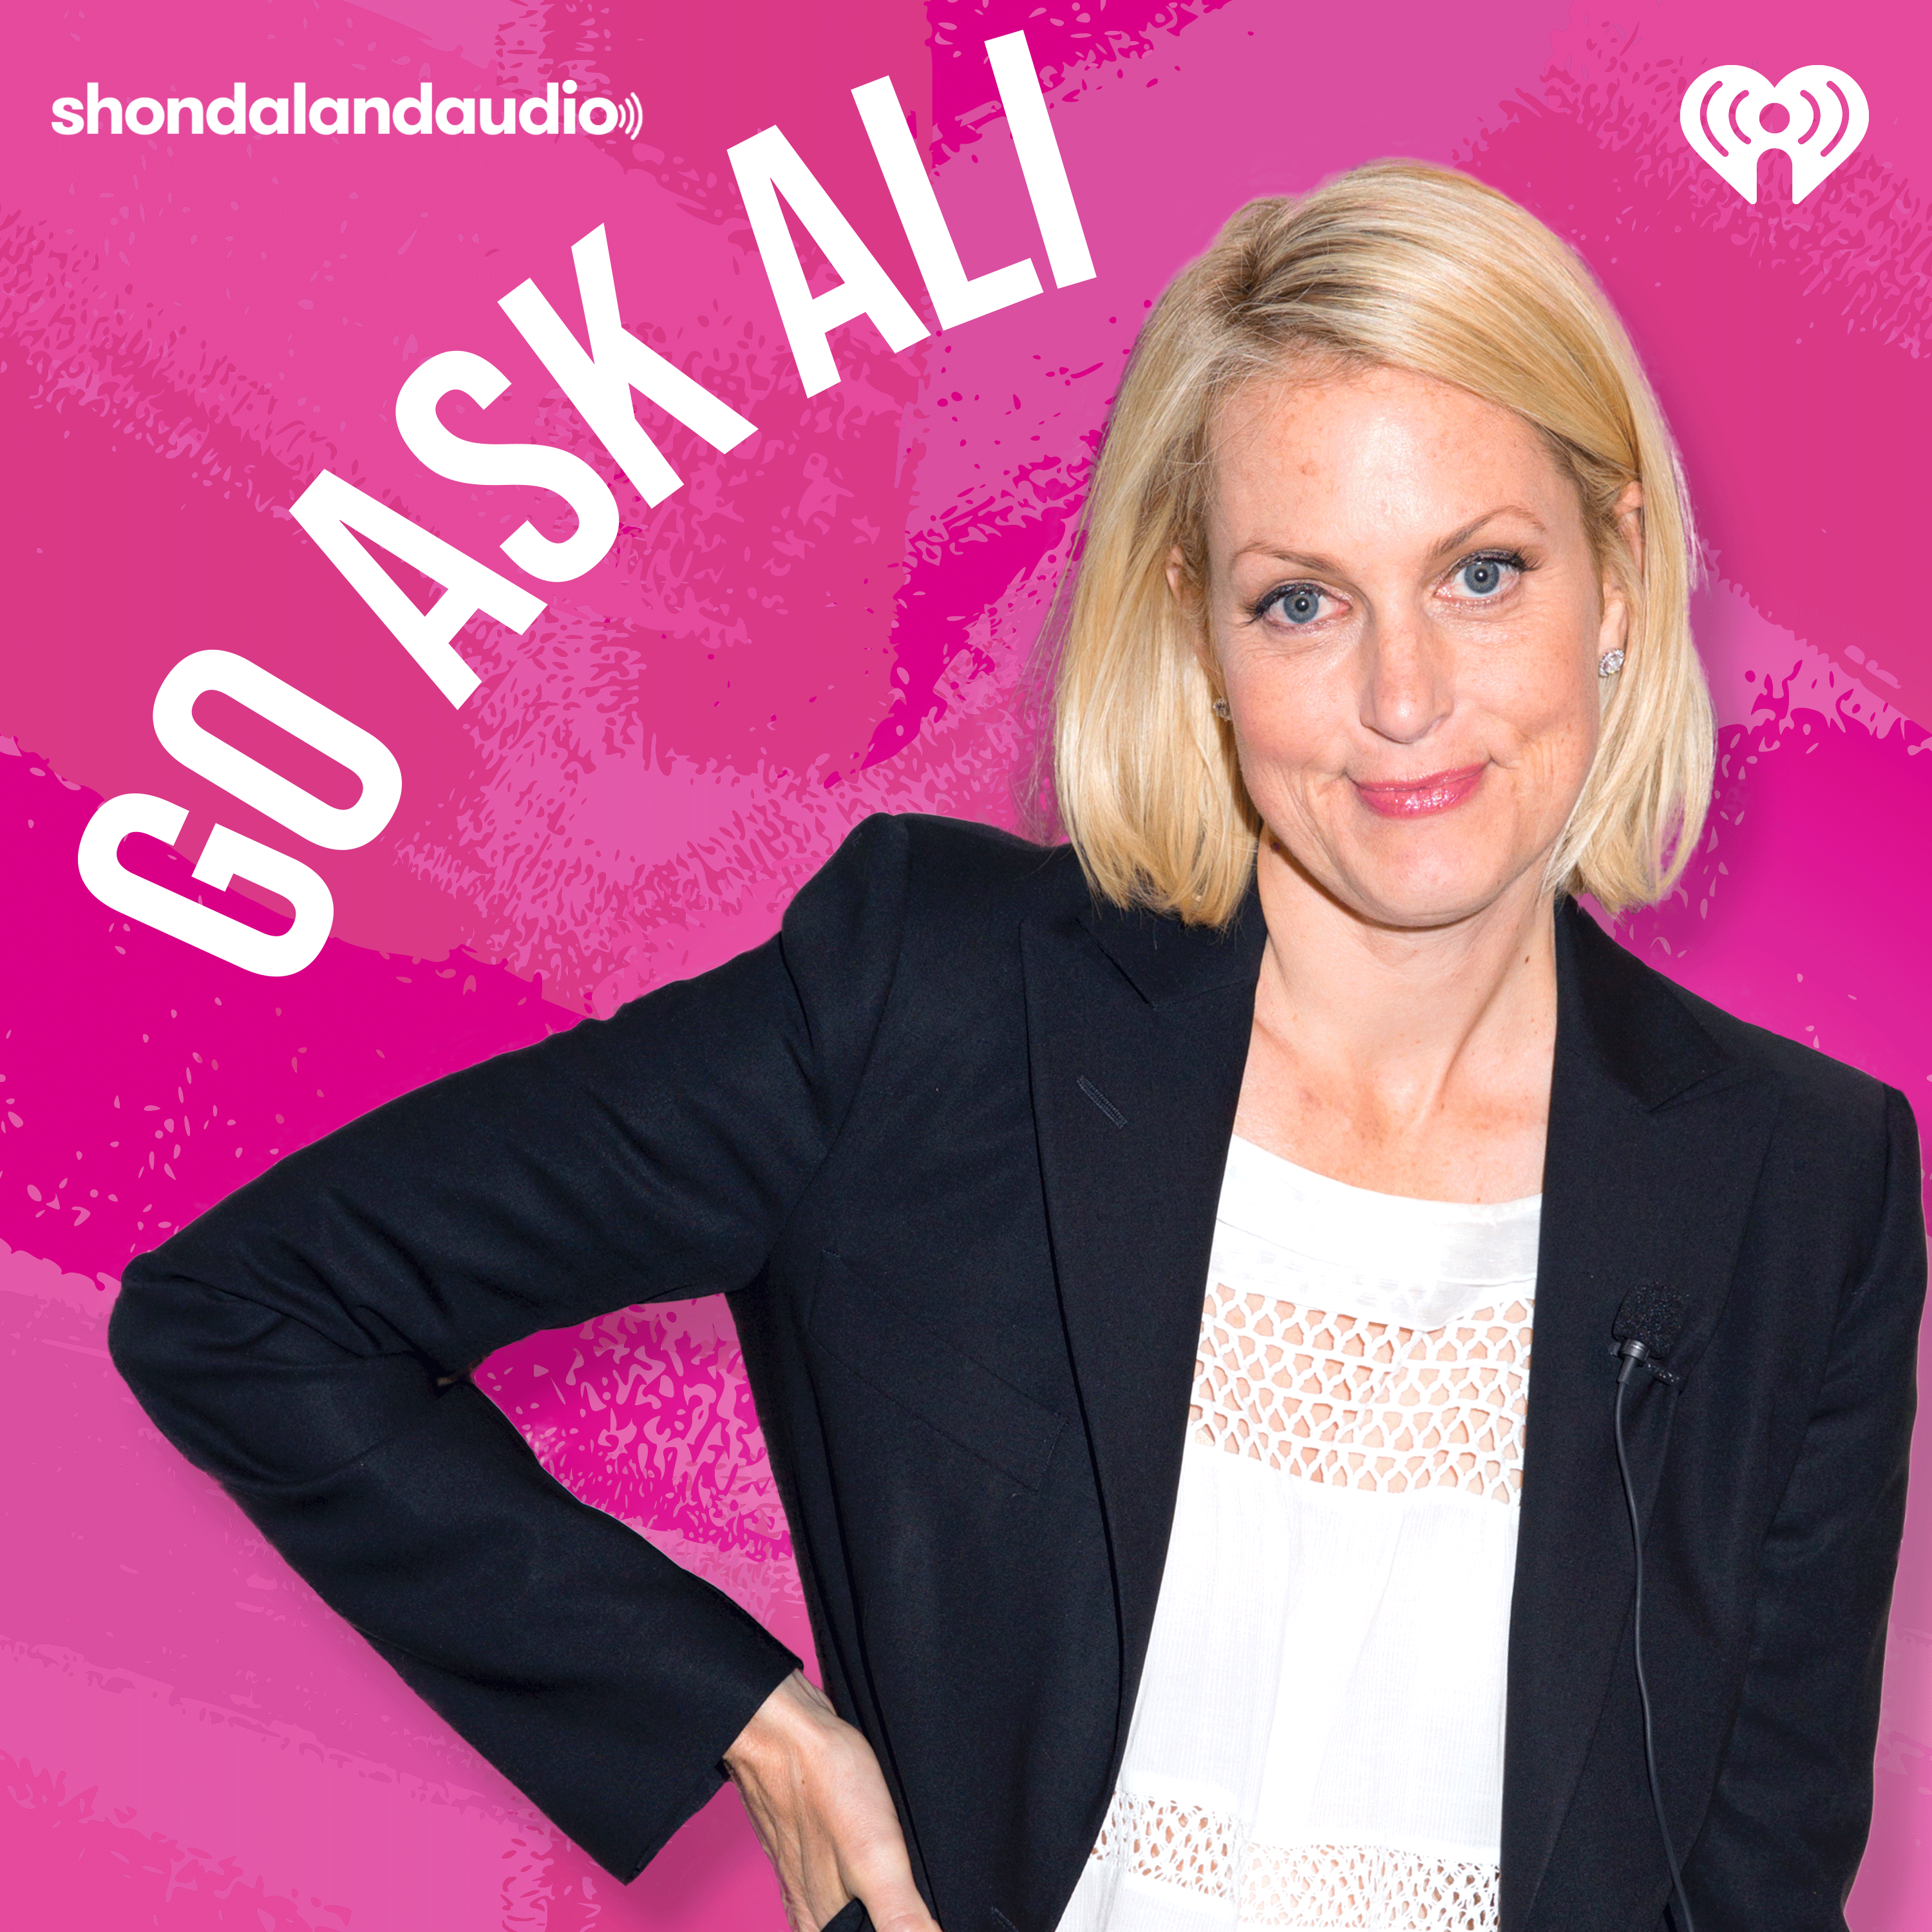 Ali Wentworth with her hand on her hip and a bright pink background.